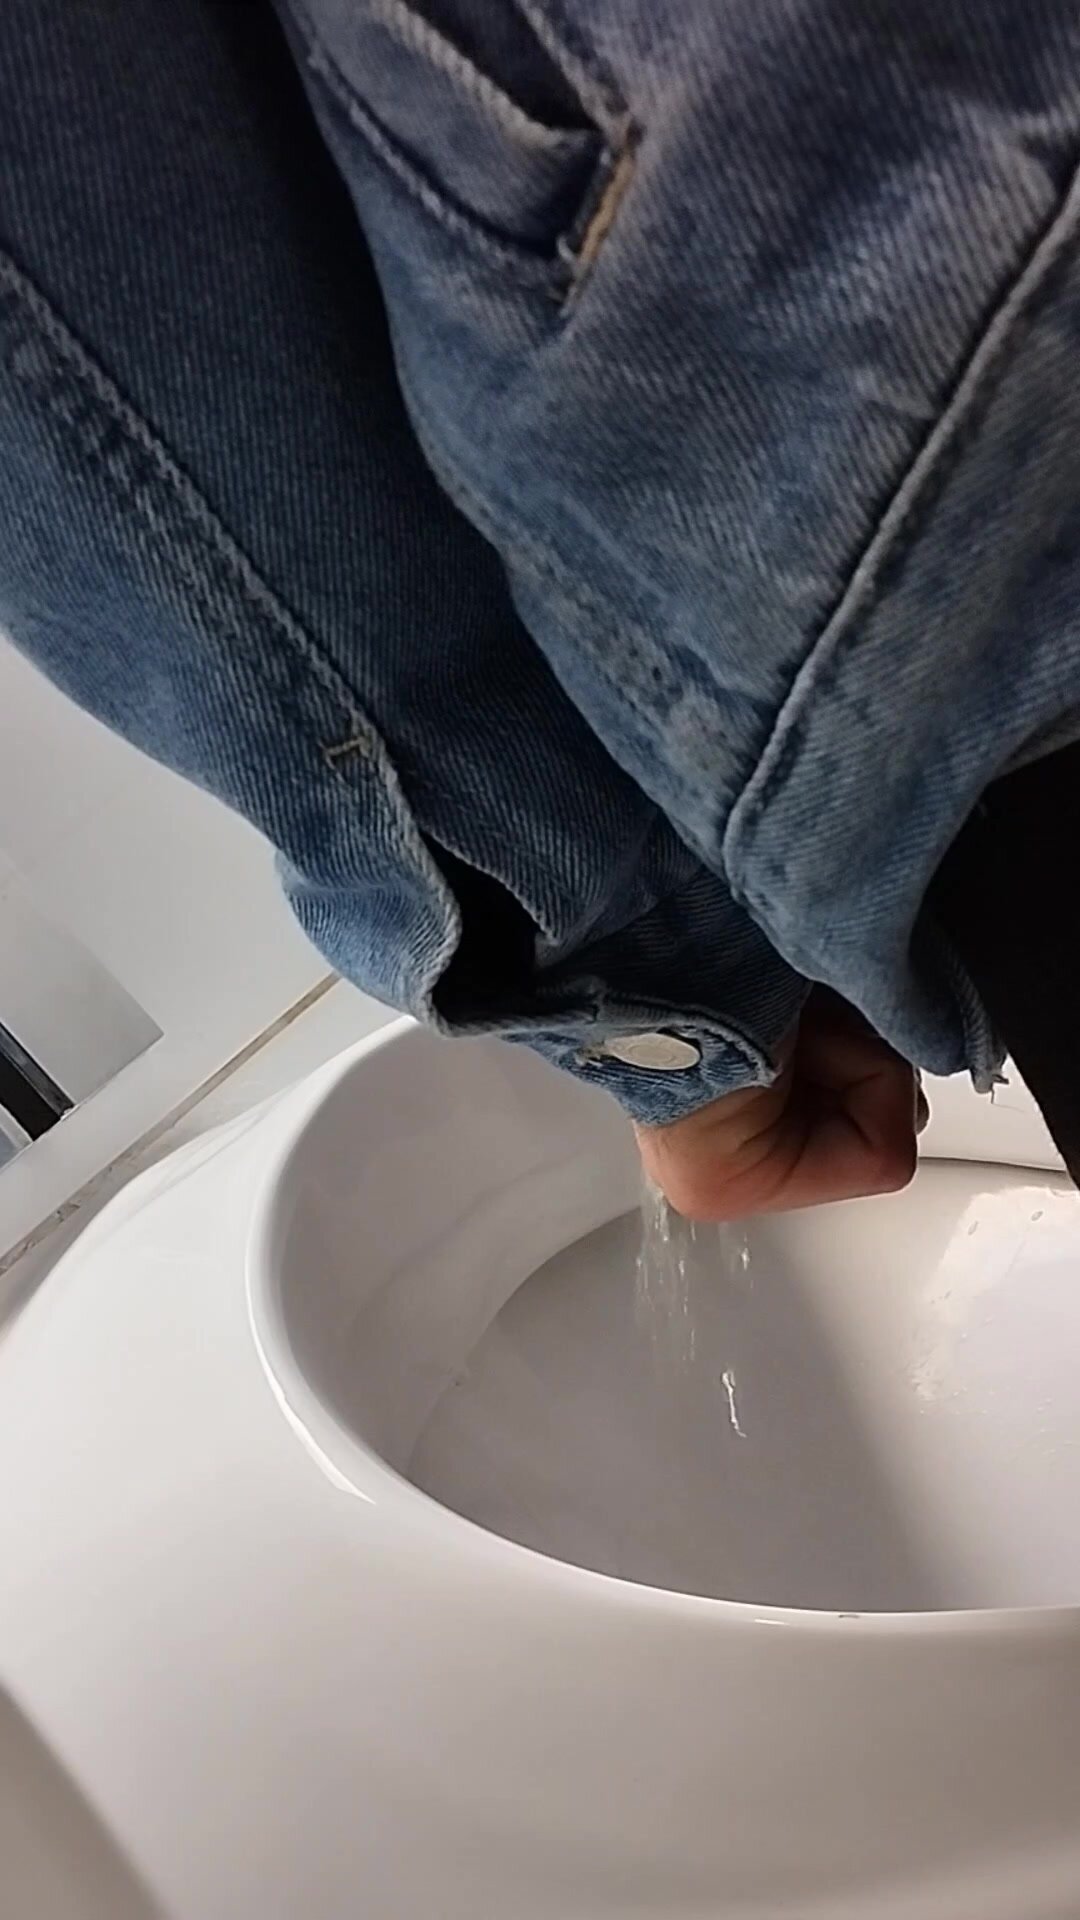 A young guy pisses at the urinal - video 42